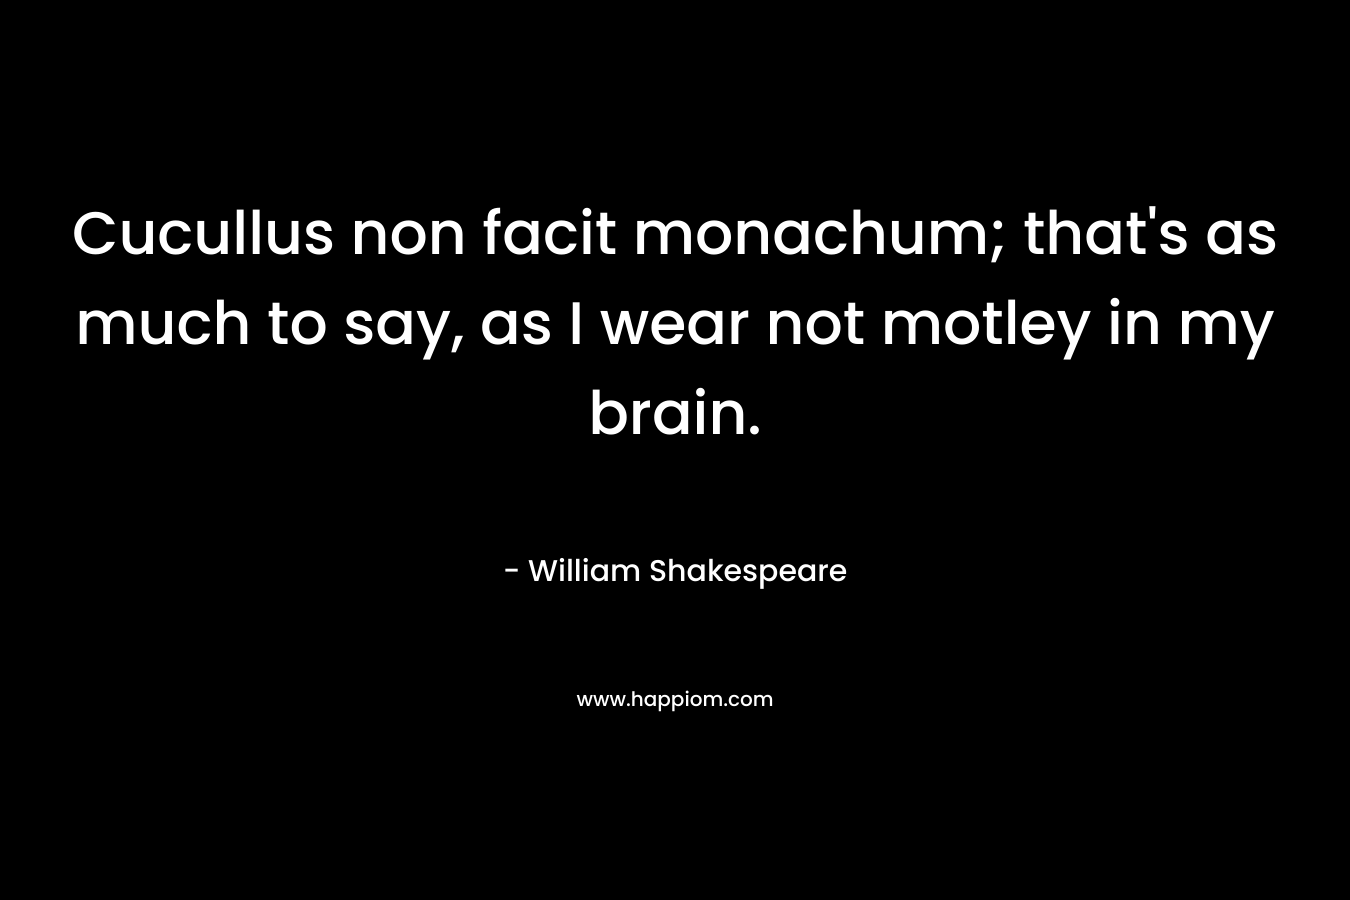 Cucullus non facit monachum; that's as much to say, as I wear not motley in my brain.